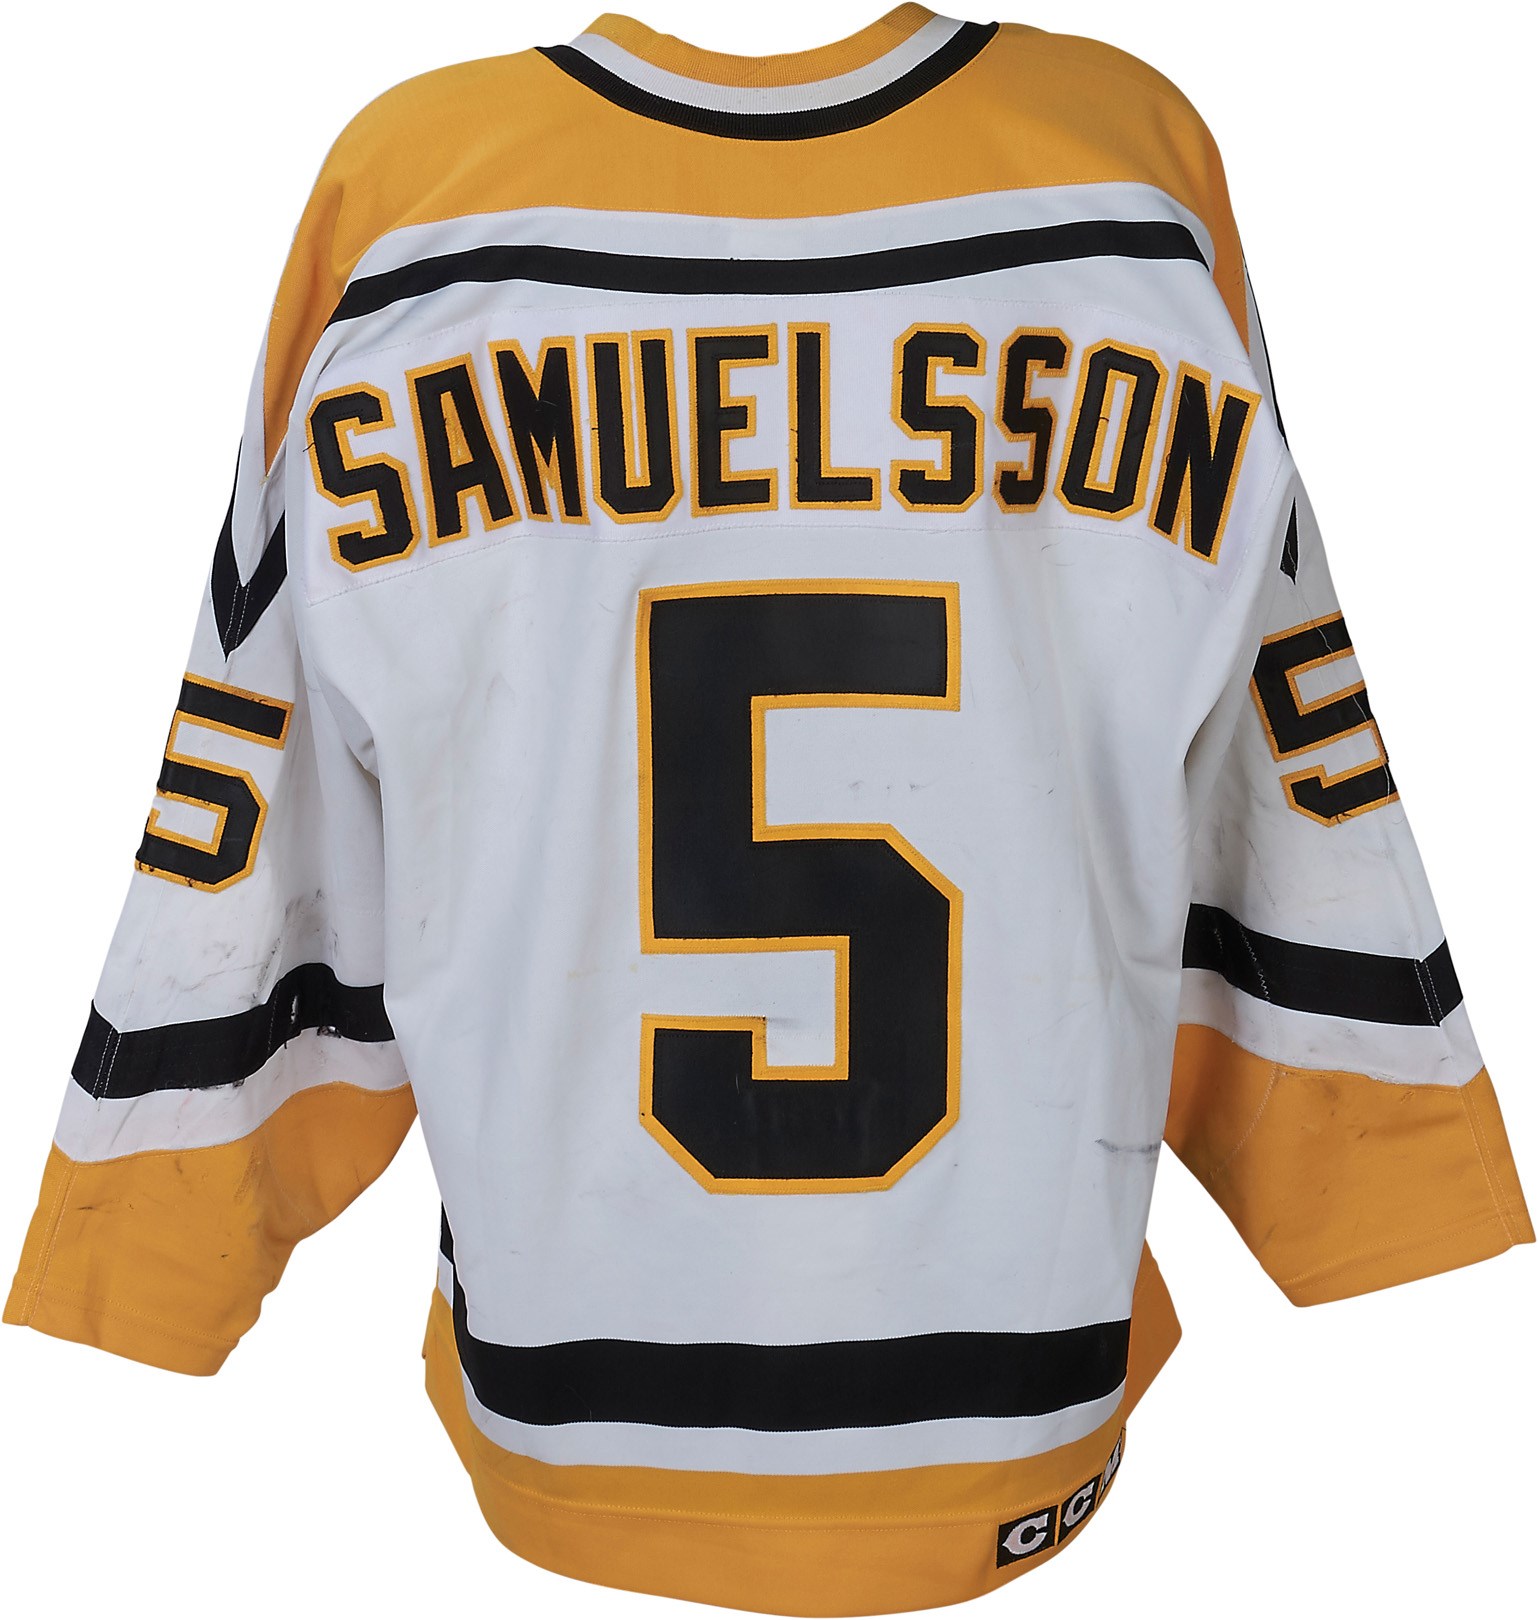 1993-94 Ulf Samuelsson Pittsburgh Penguins Game Used Jersey